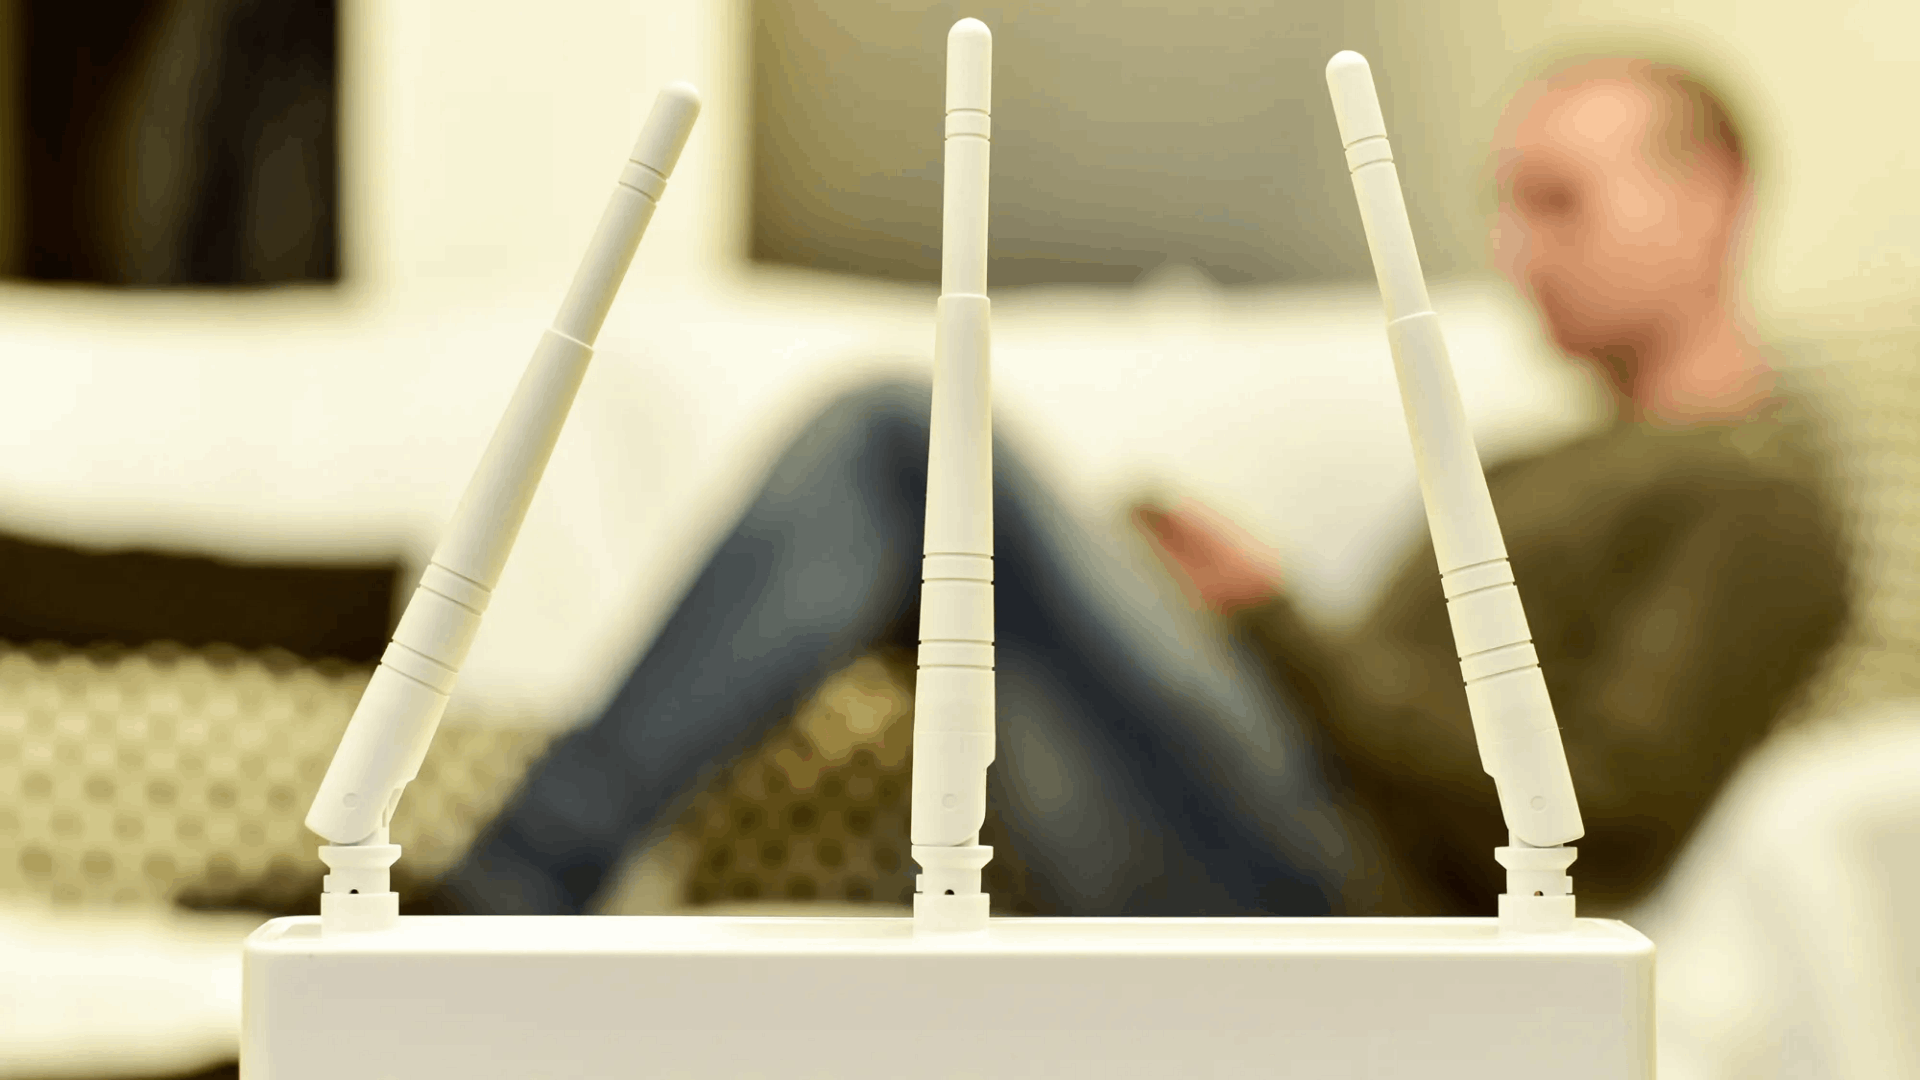 Learn How to Improve Wi-Fi Speed